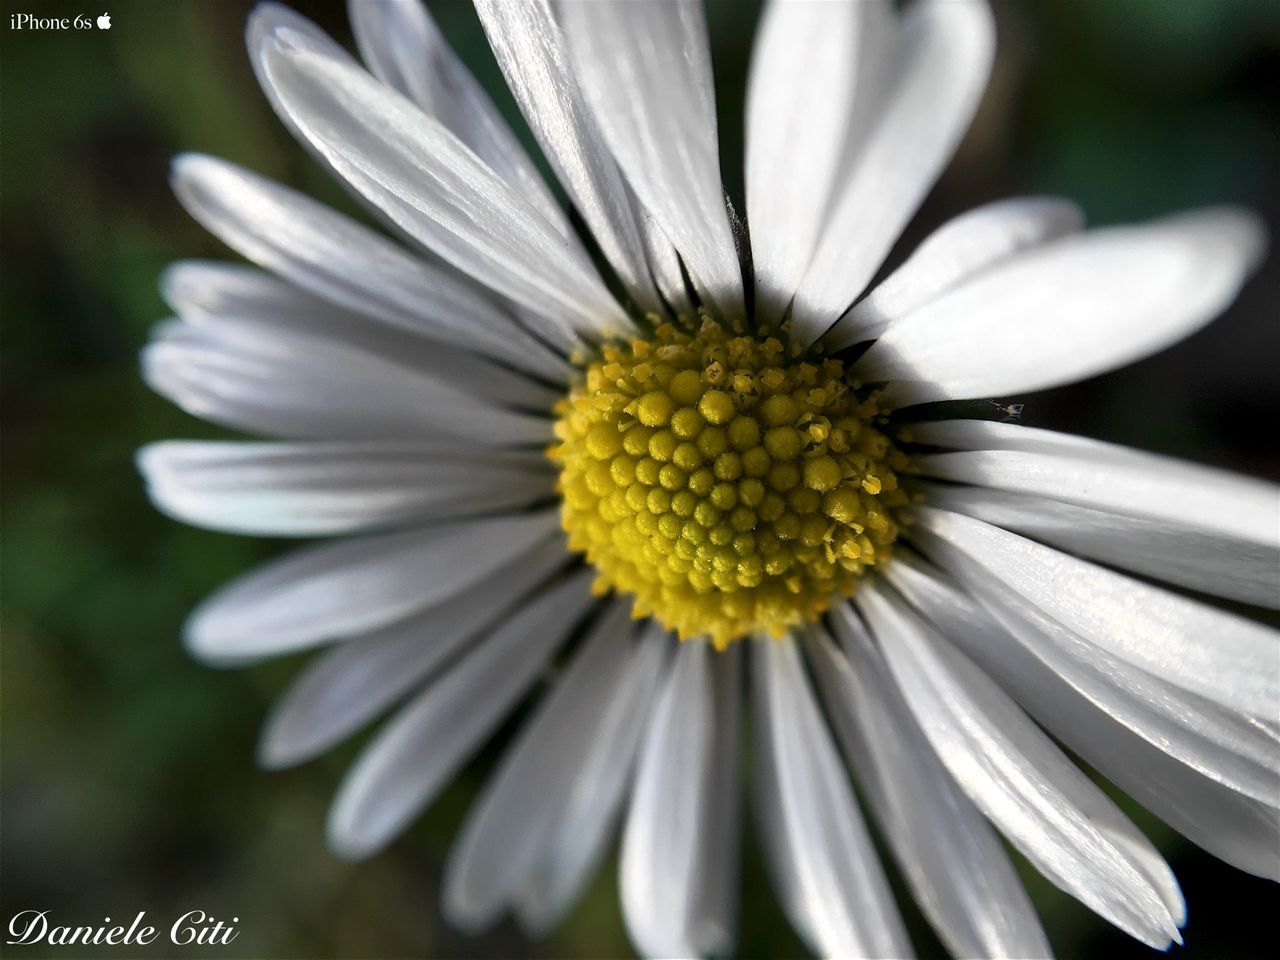 CLOSE-UP OF WHITE DAISY BLOOMING OUTDOORS